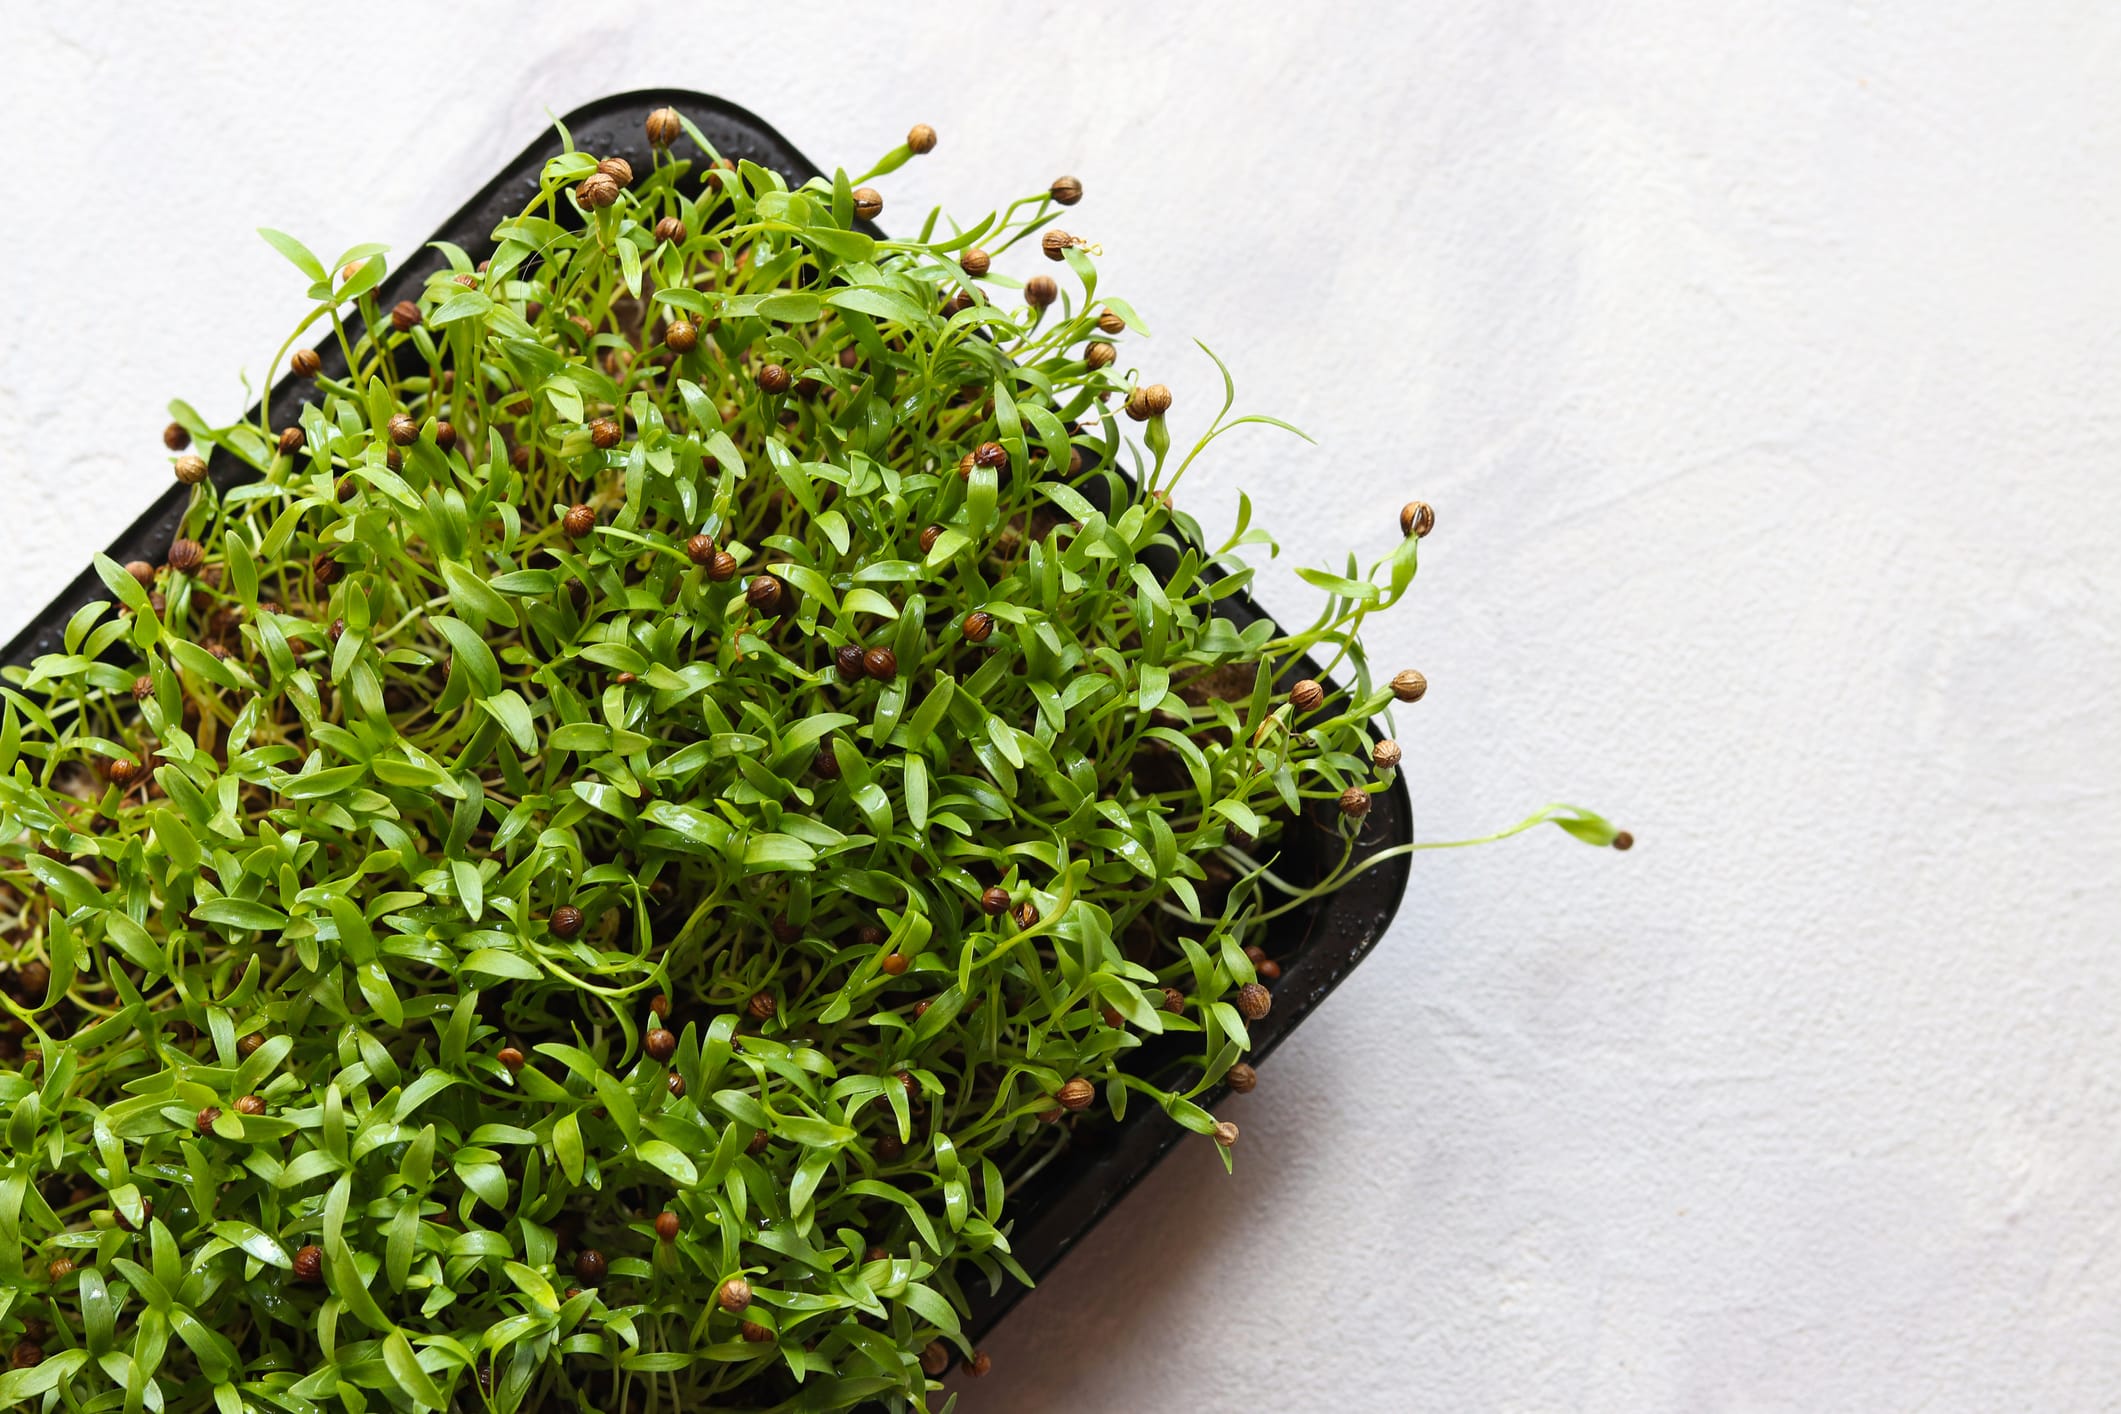 Microgreen seeds growing in a tray